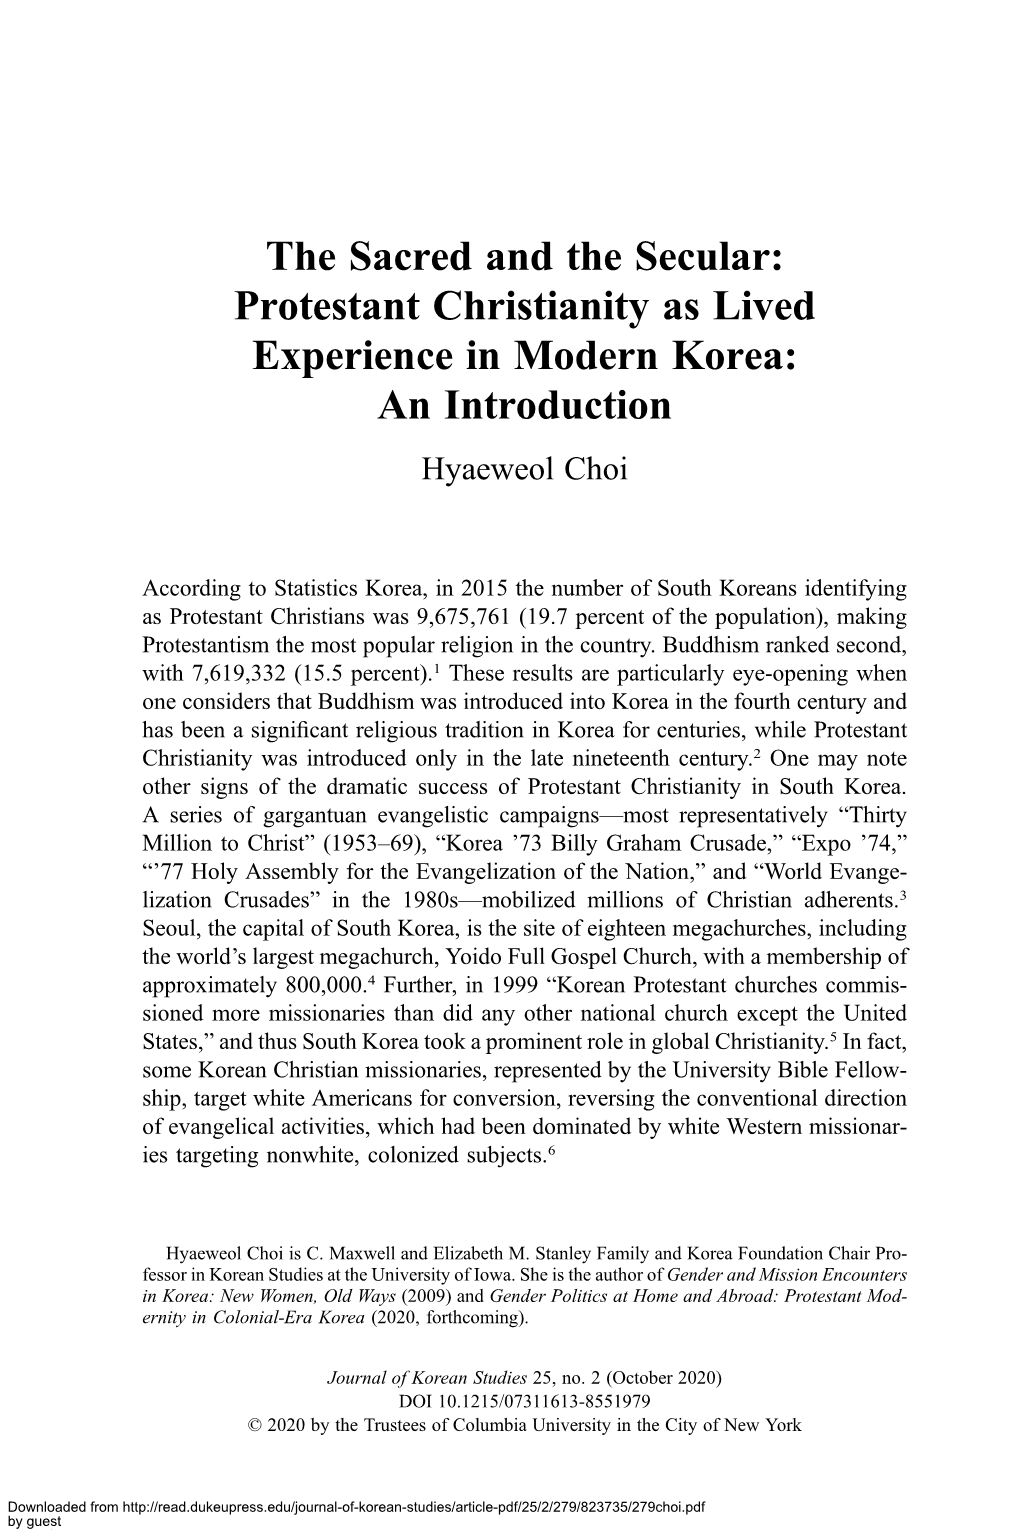 Protestant Christianity As Lived Experience in Modern Korea: an Introduction